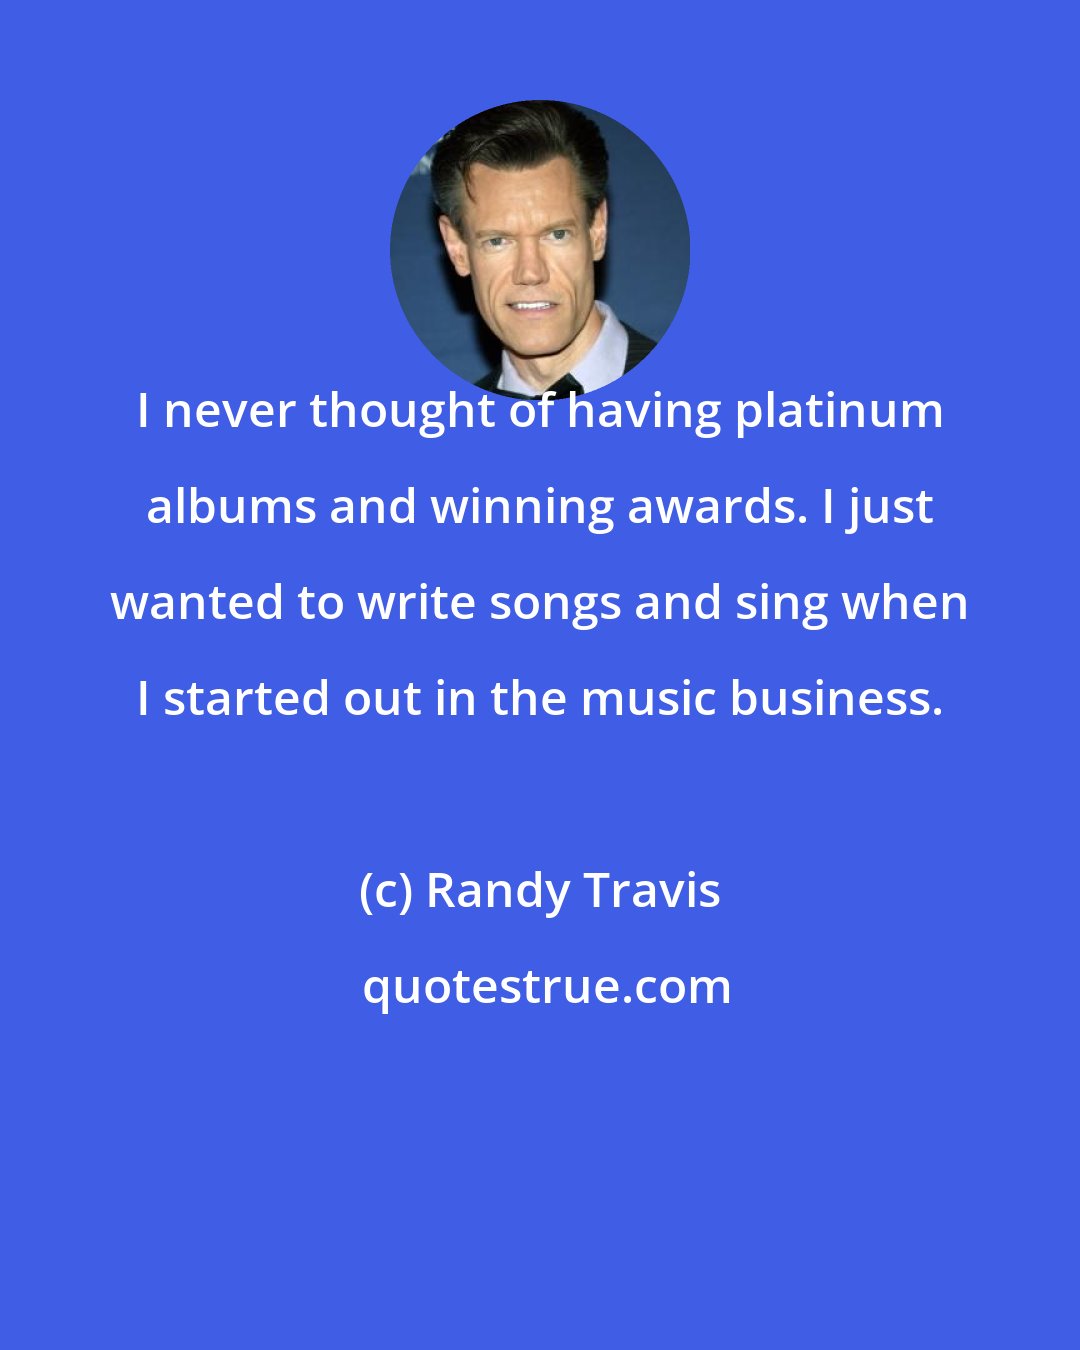 Randy Travis: I never thought of having platinum albums and winning awards. I just wanted to write songs and sing when I started out in the music business.